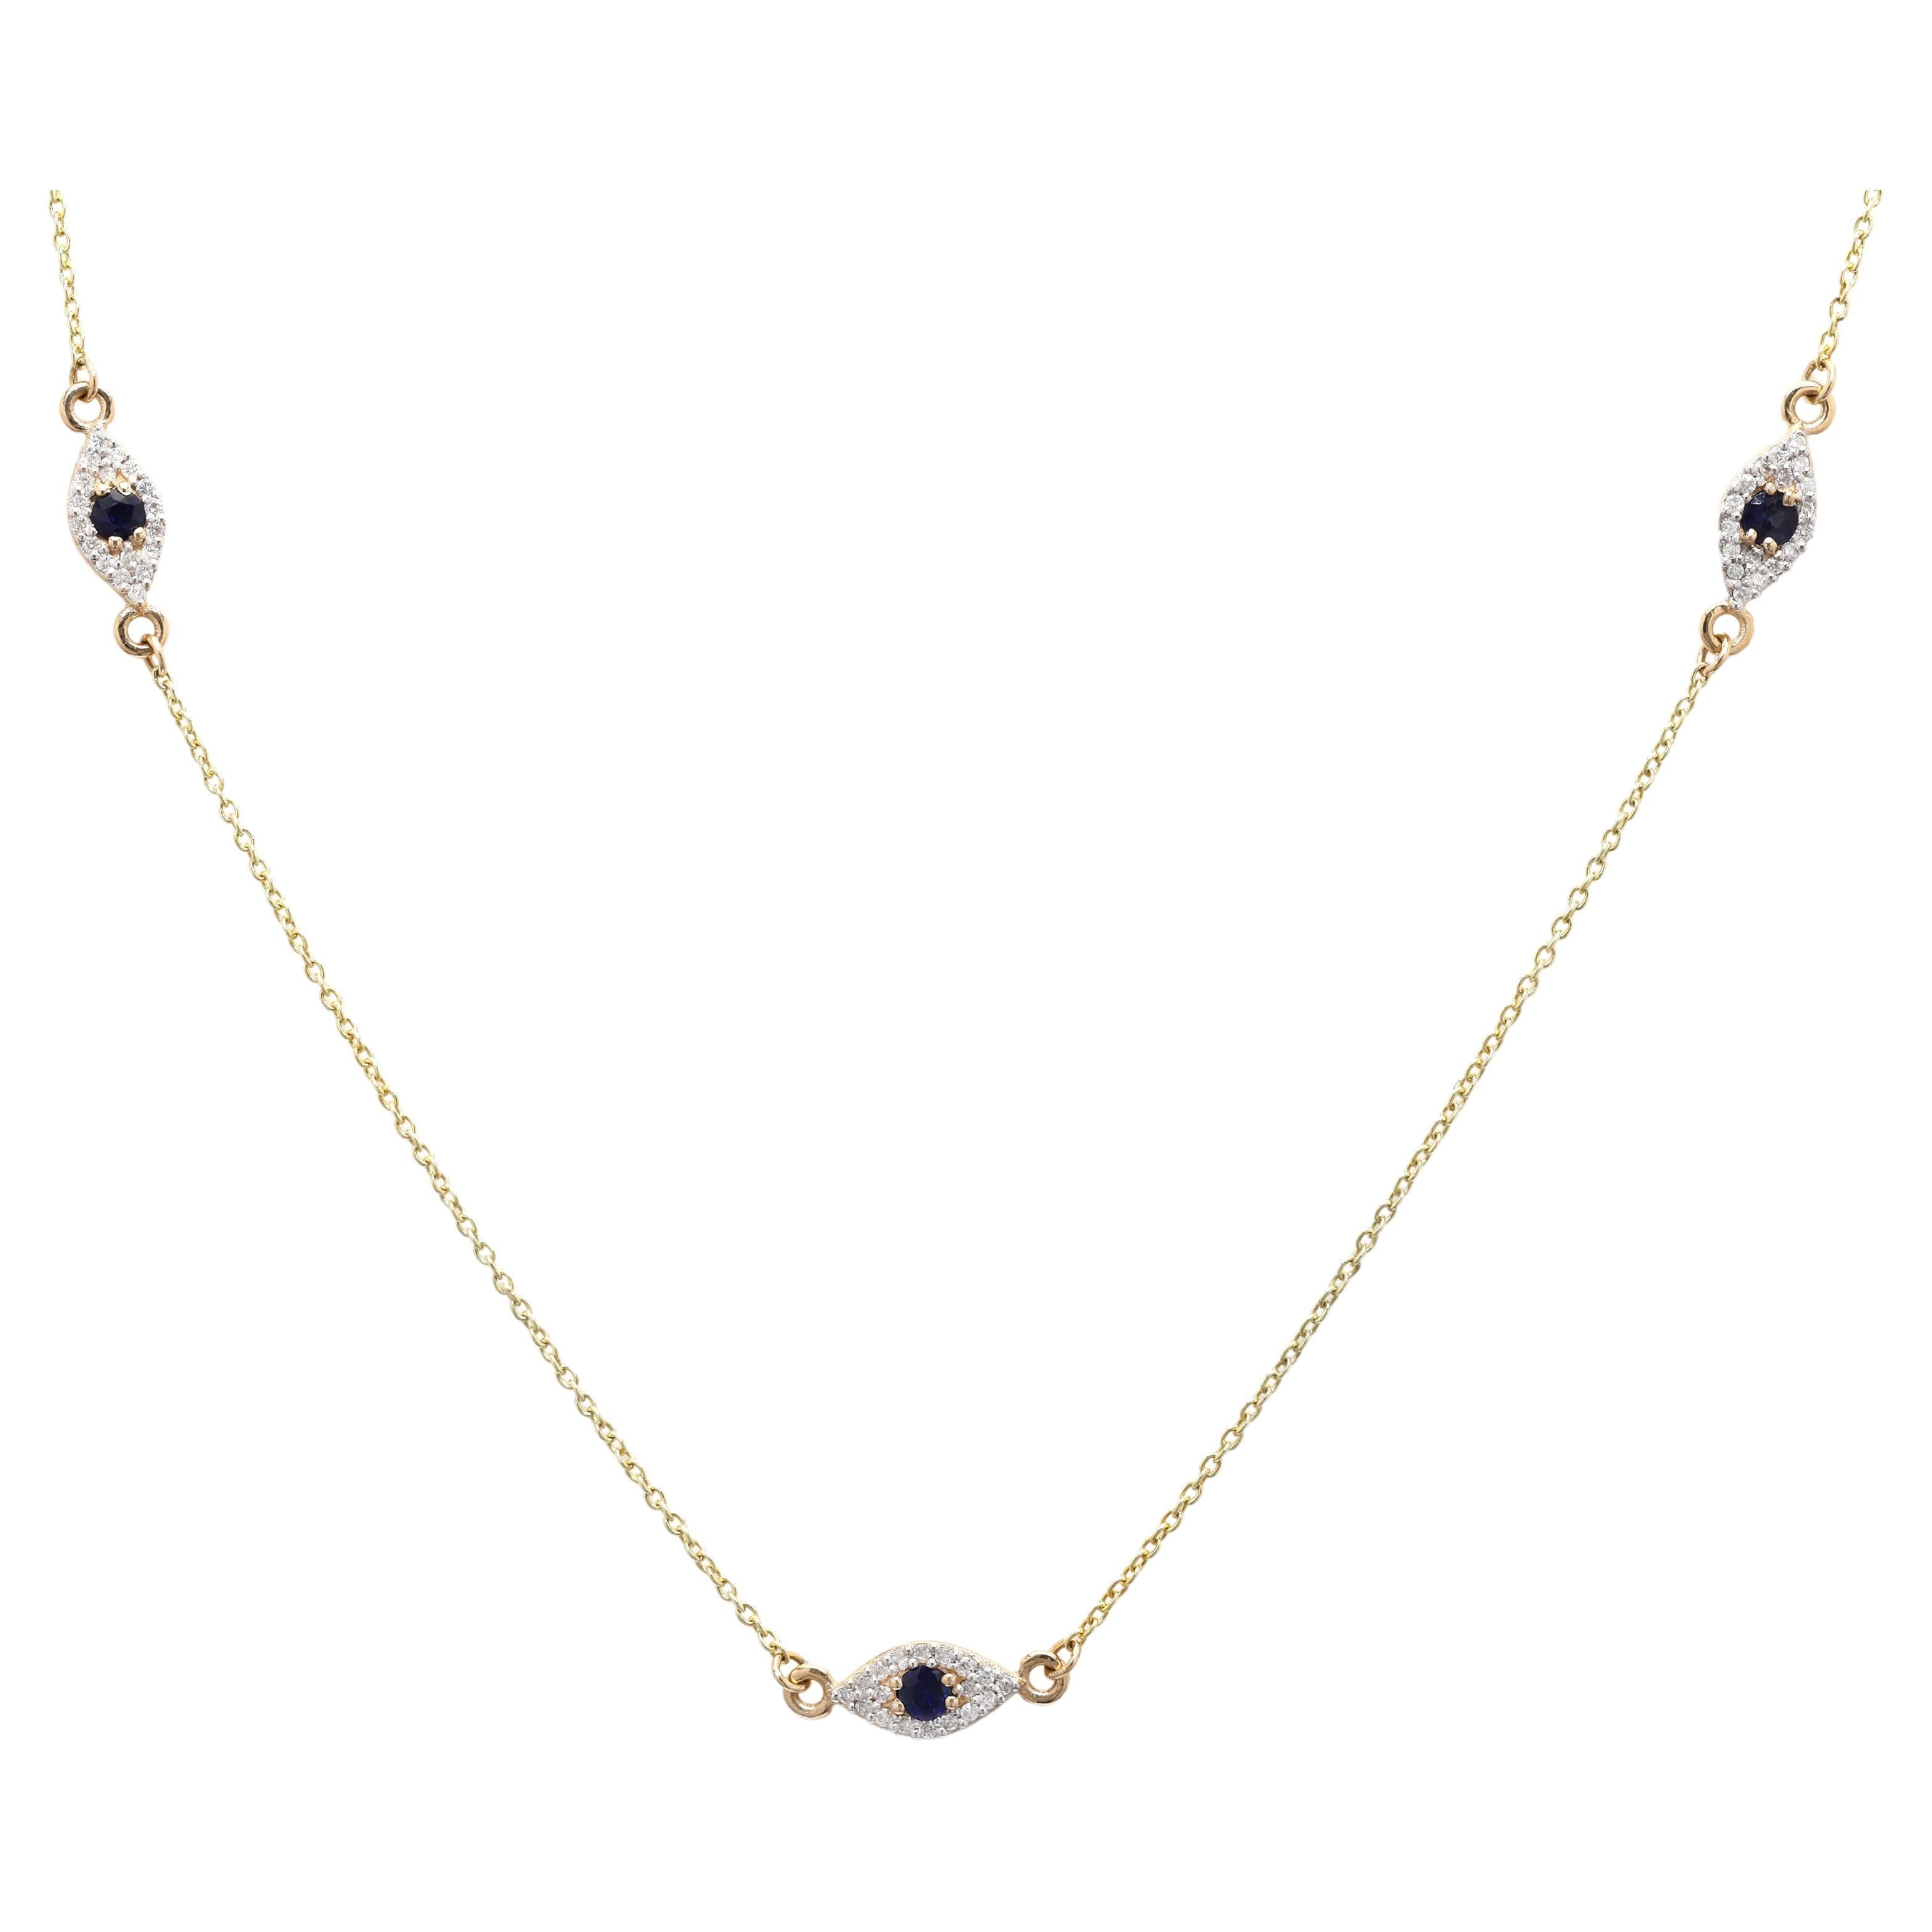 Evil Eye Blue Sapphire Pendant Necklace in 14K Yellow Gold